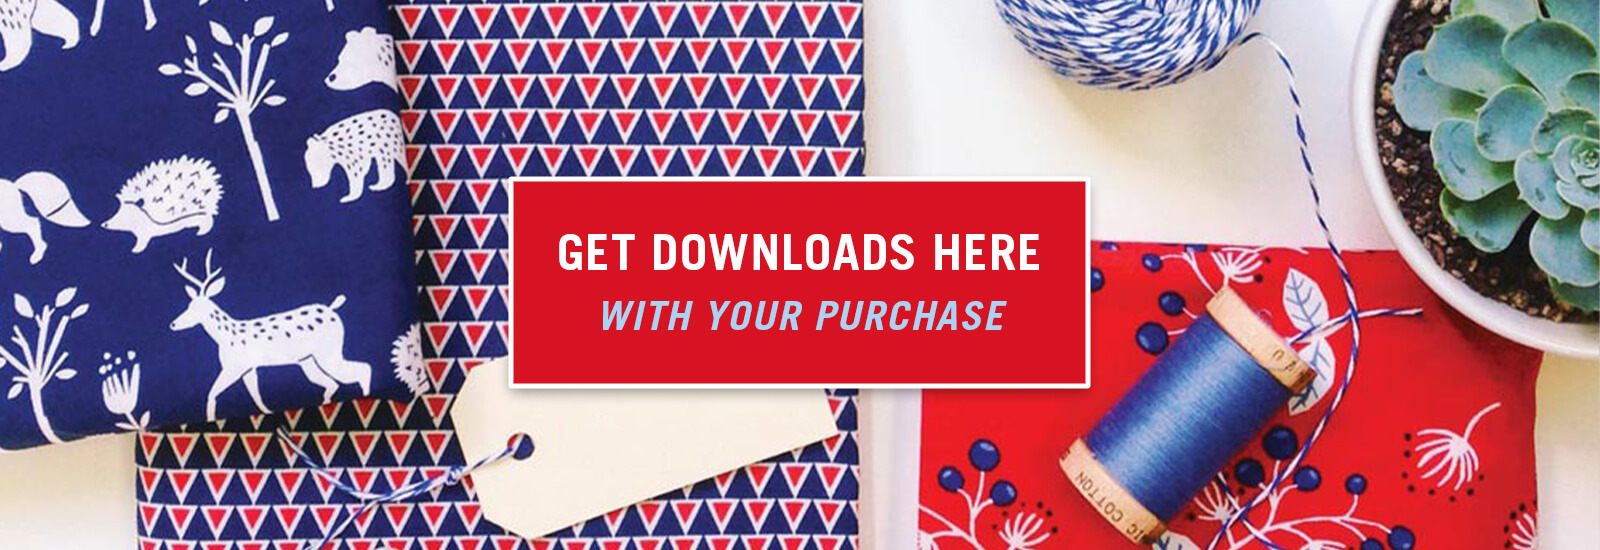 Classic Sewing. Get downloads with your purchase